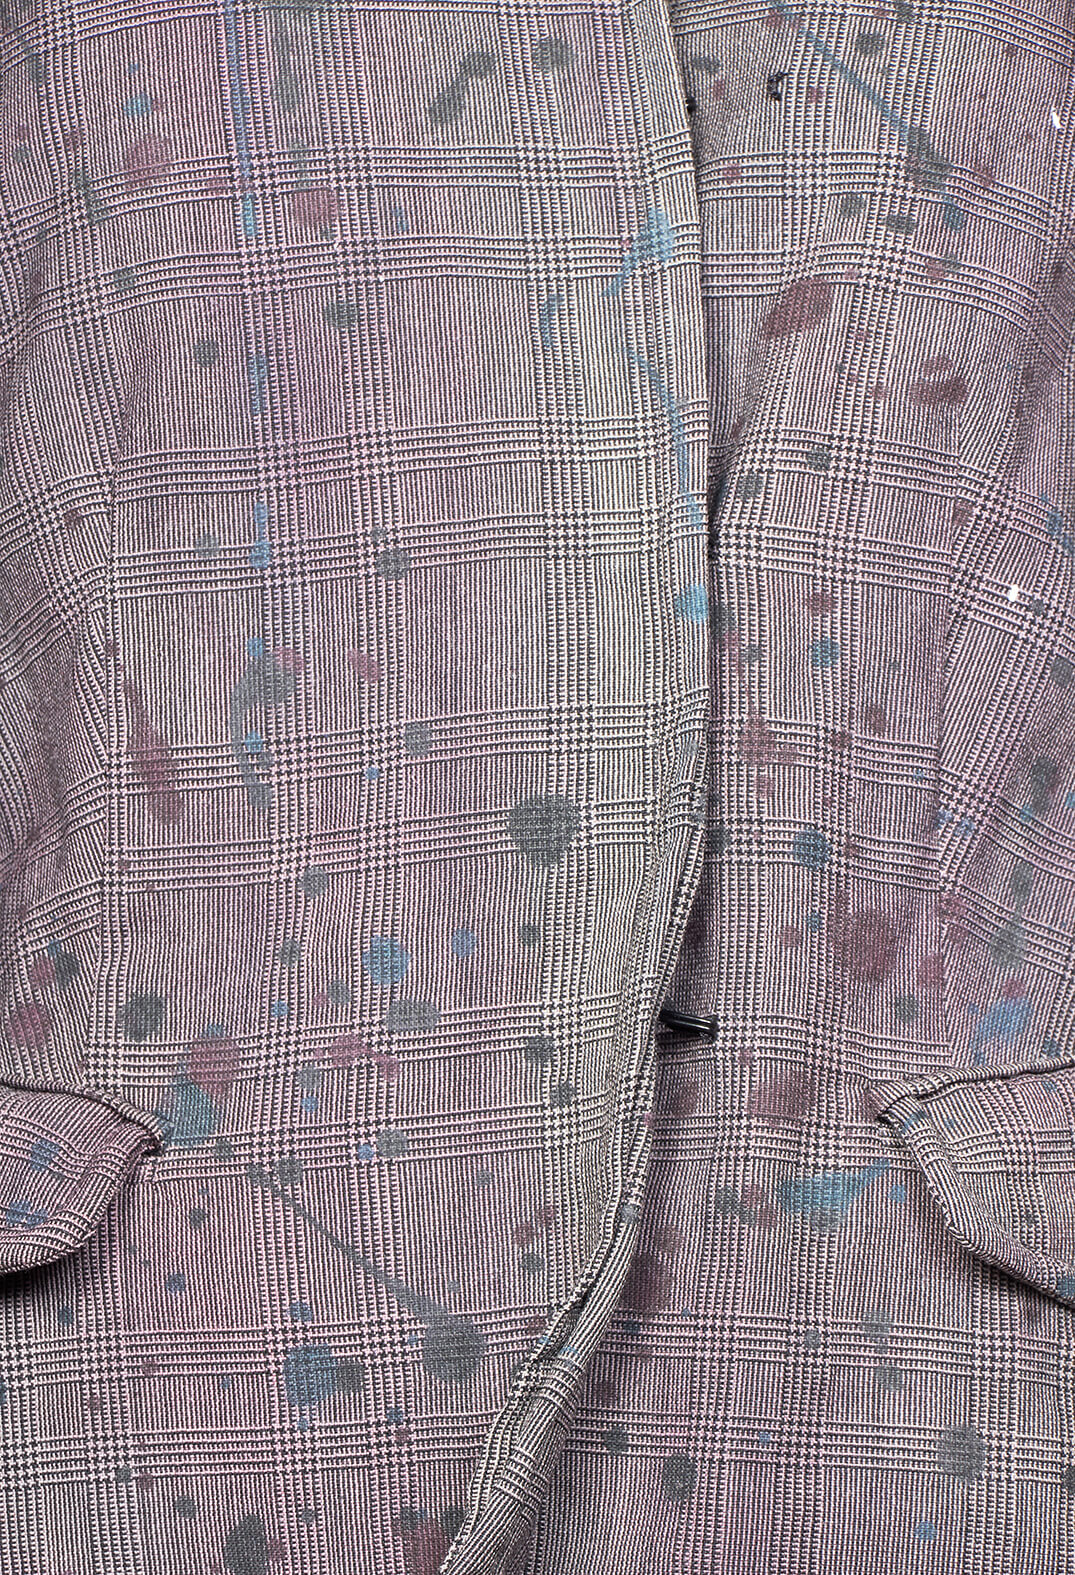 Suiting Style Jacket in Umbra Paint